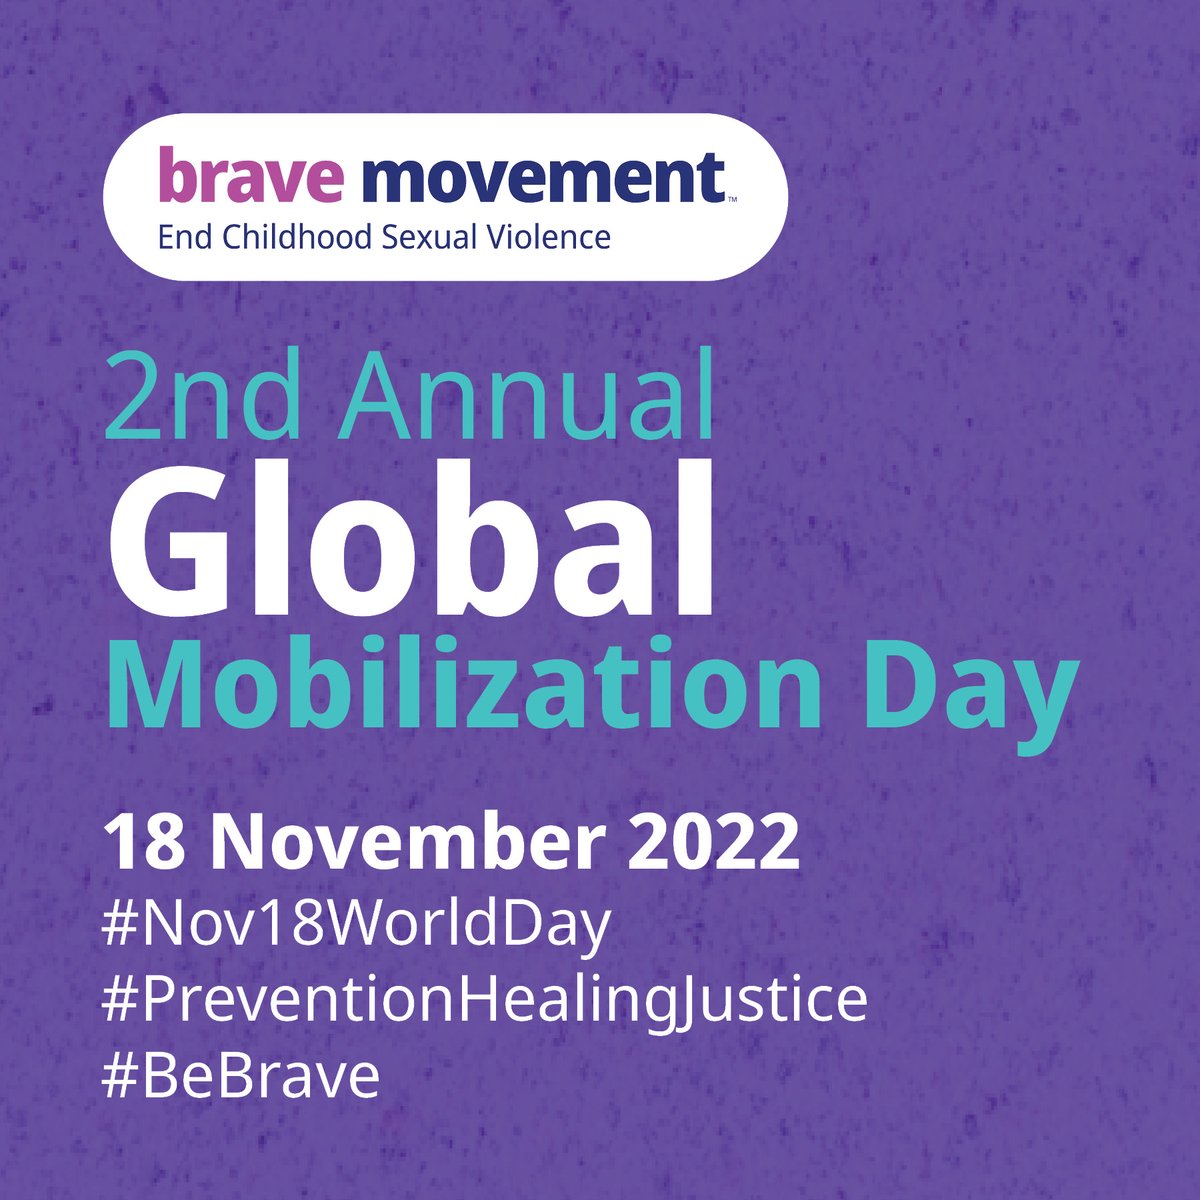 It's still time to mobilize for the World Day for Prevention, Healing and Justice to End Childhood Sexual Violence on 18 November! #BraveMovement has prepared ready-to-use tools and resources for you. #PreventionHealingJustice #BeBrave #Nov18WorldDay bravemovement.org/global-mobiliz…